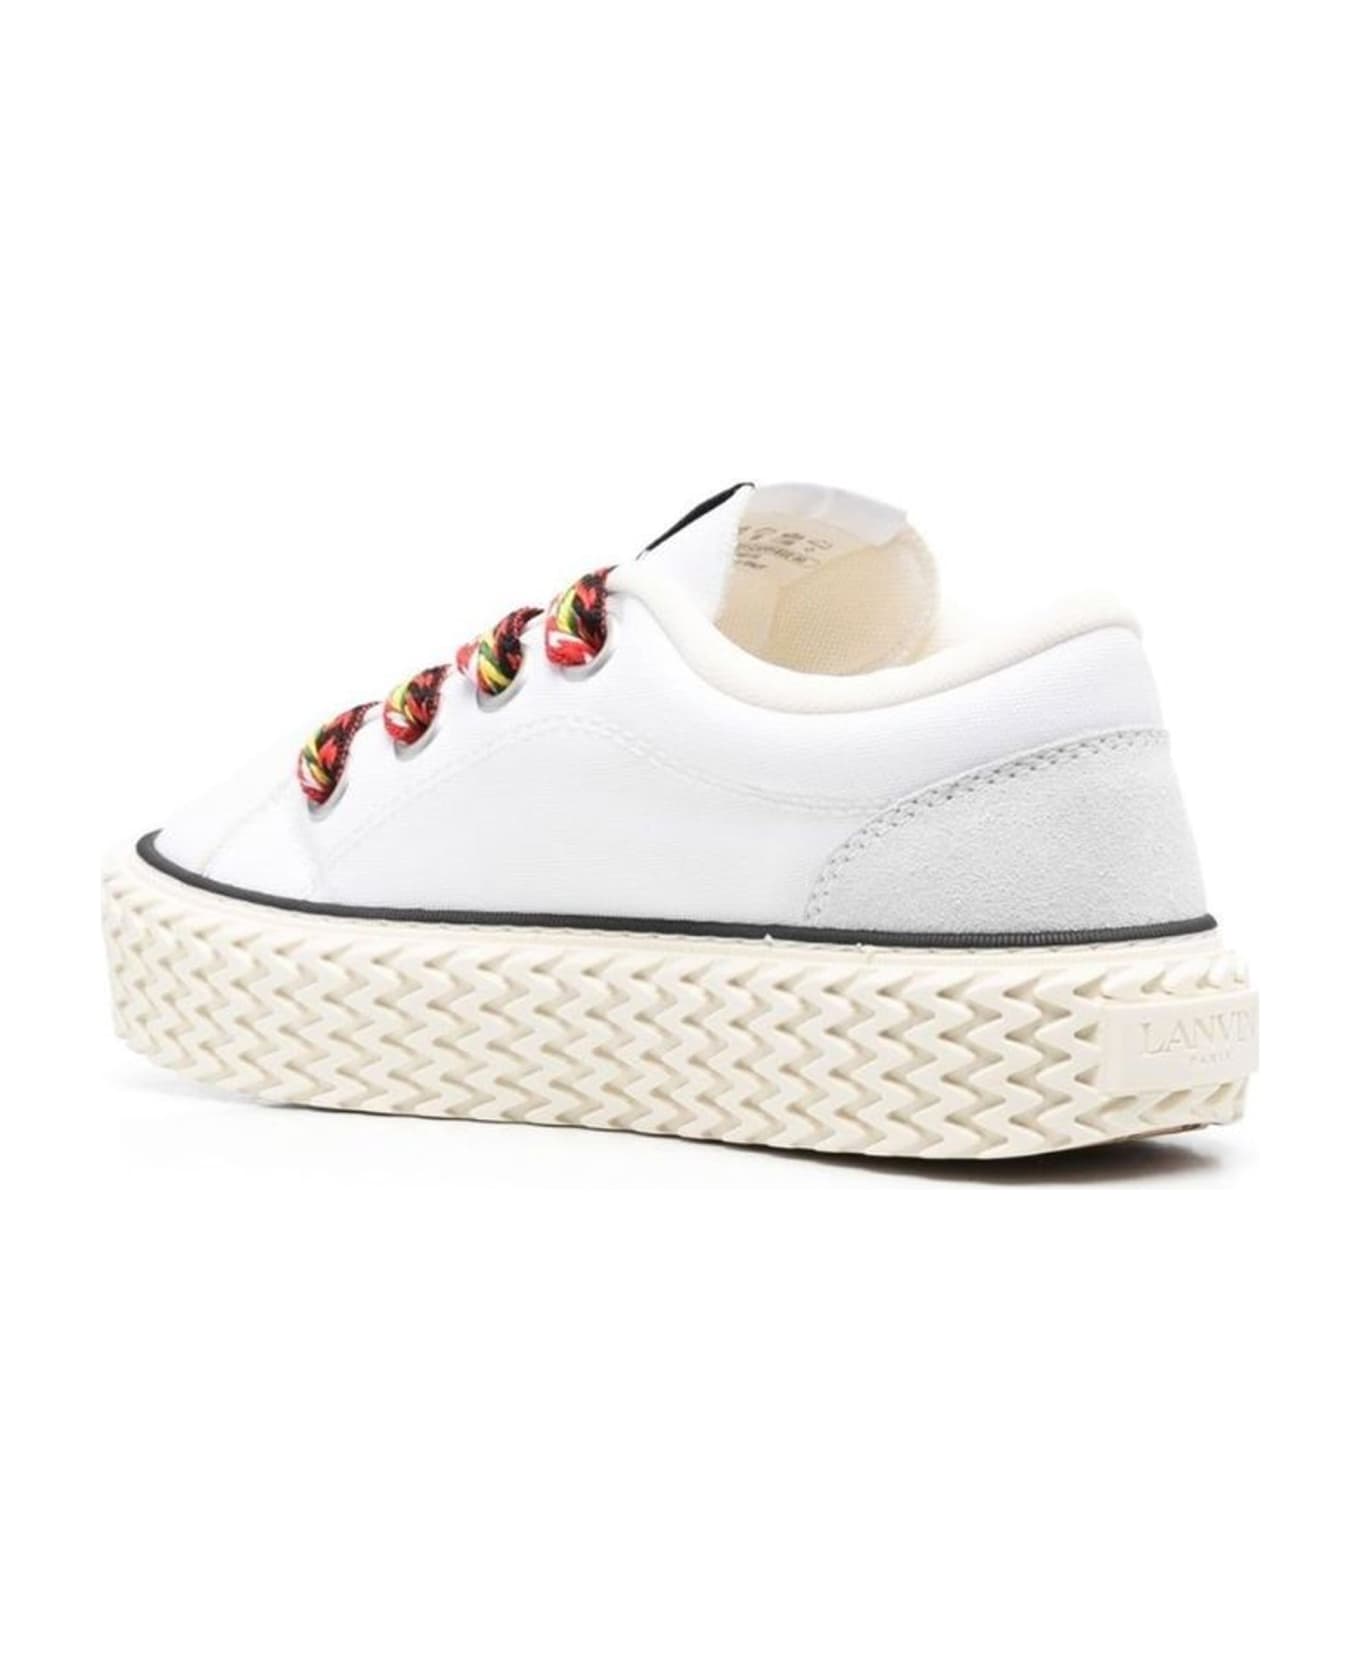 Lanvin Cotton Lace-up Sneakers - White ウェッジシューズ